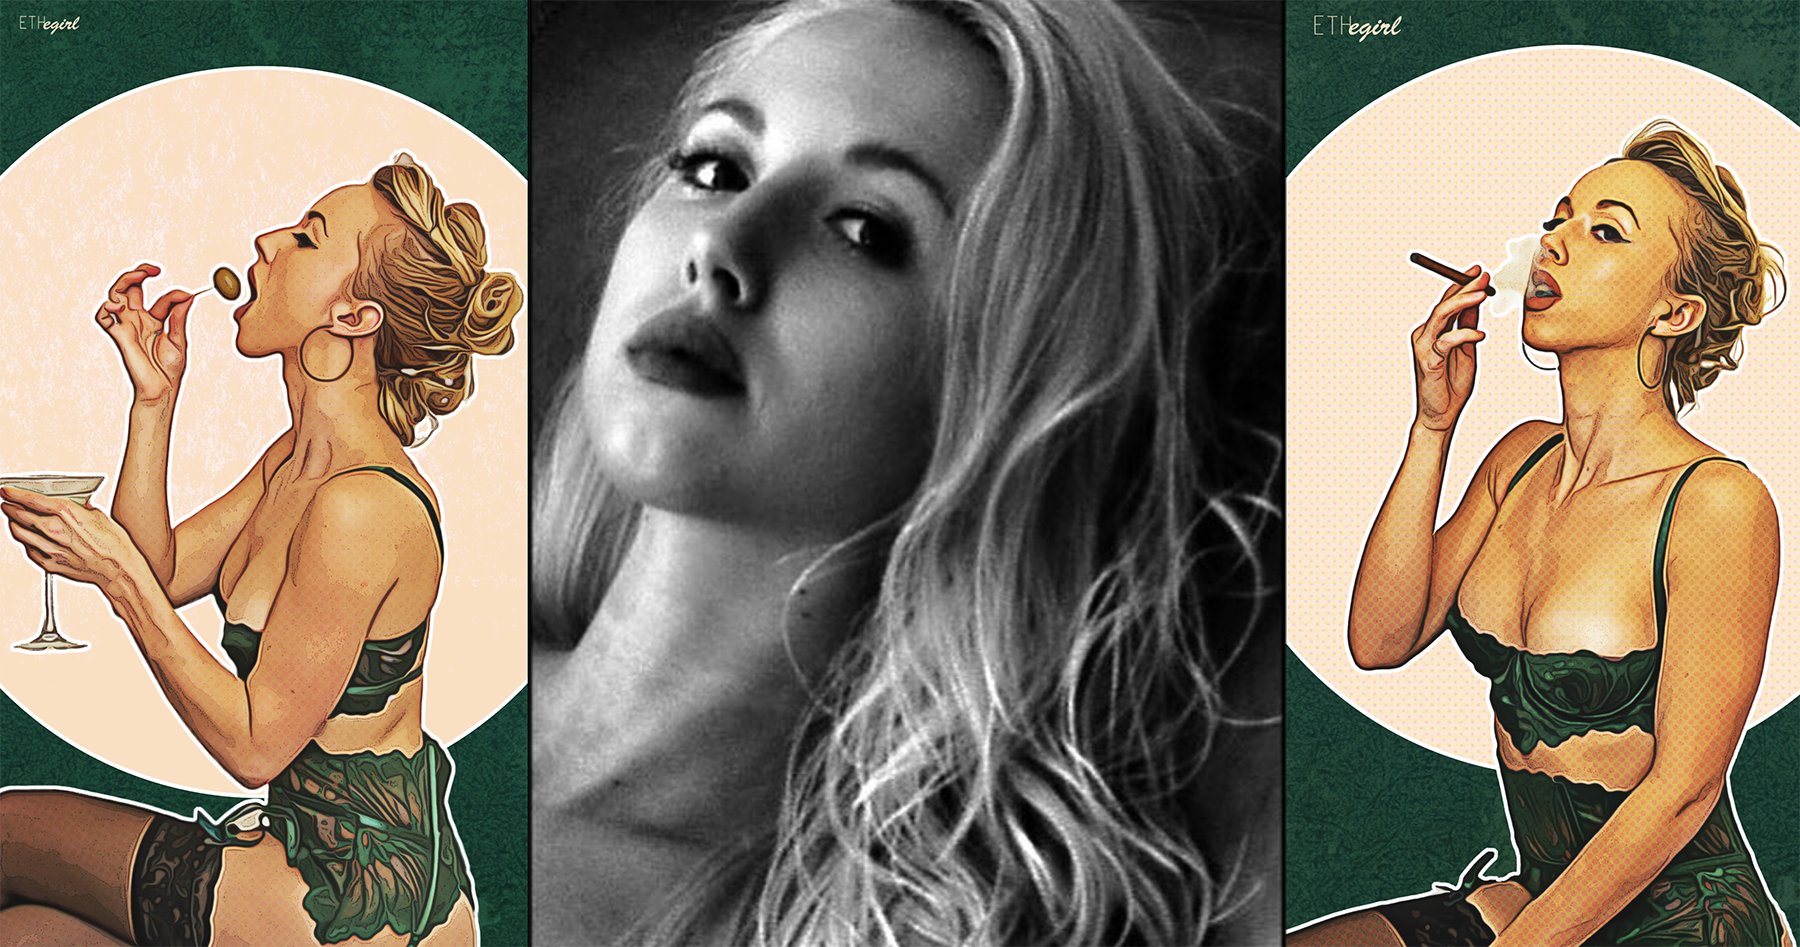 Three images in a row of Sarah Marie — on left and right, as ETHEgirl portrayed in 1940s pinup style; center a black and white headshot